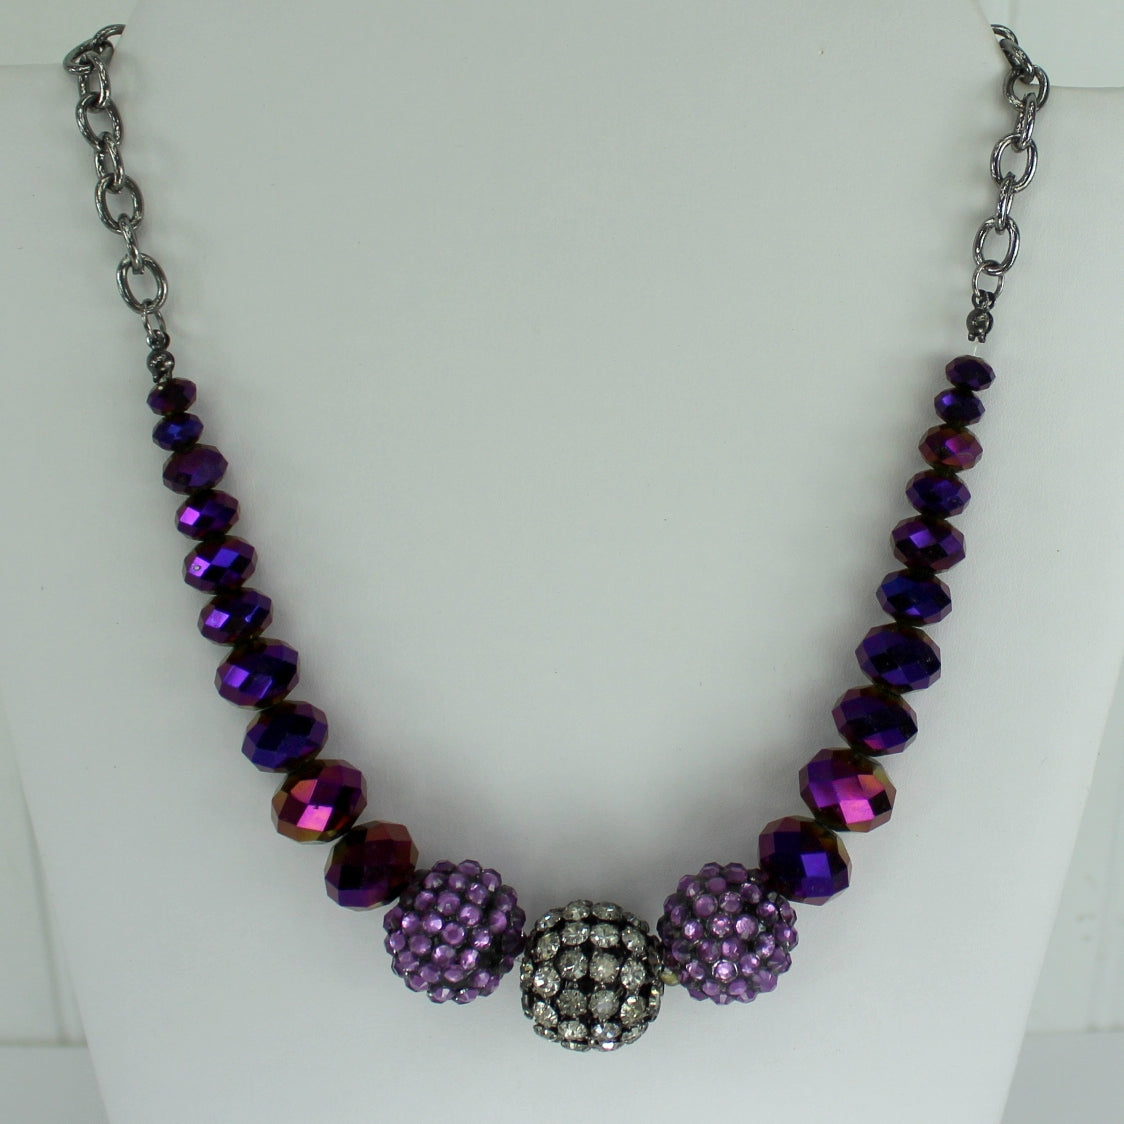 Designed signed Necklace Amethyst Crystal & Iridescent Cut Beads Alive with Sparkle clear RS prong set